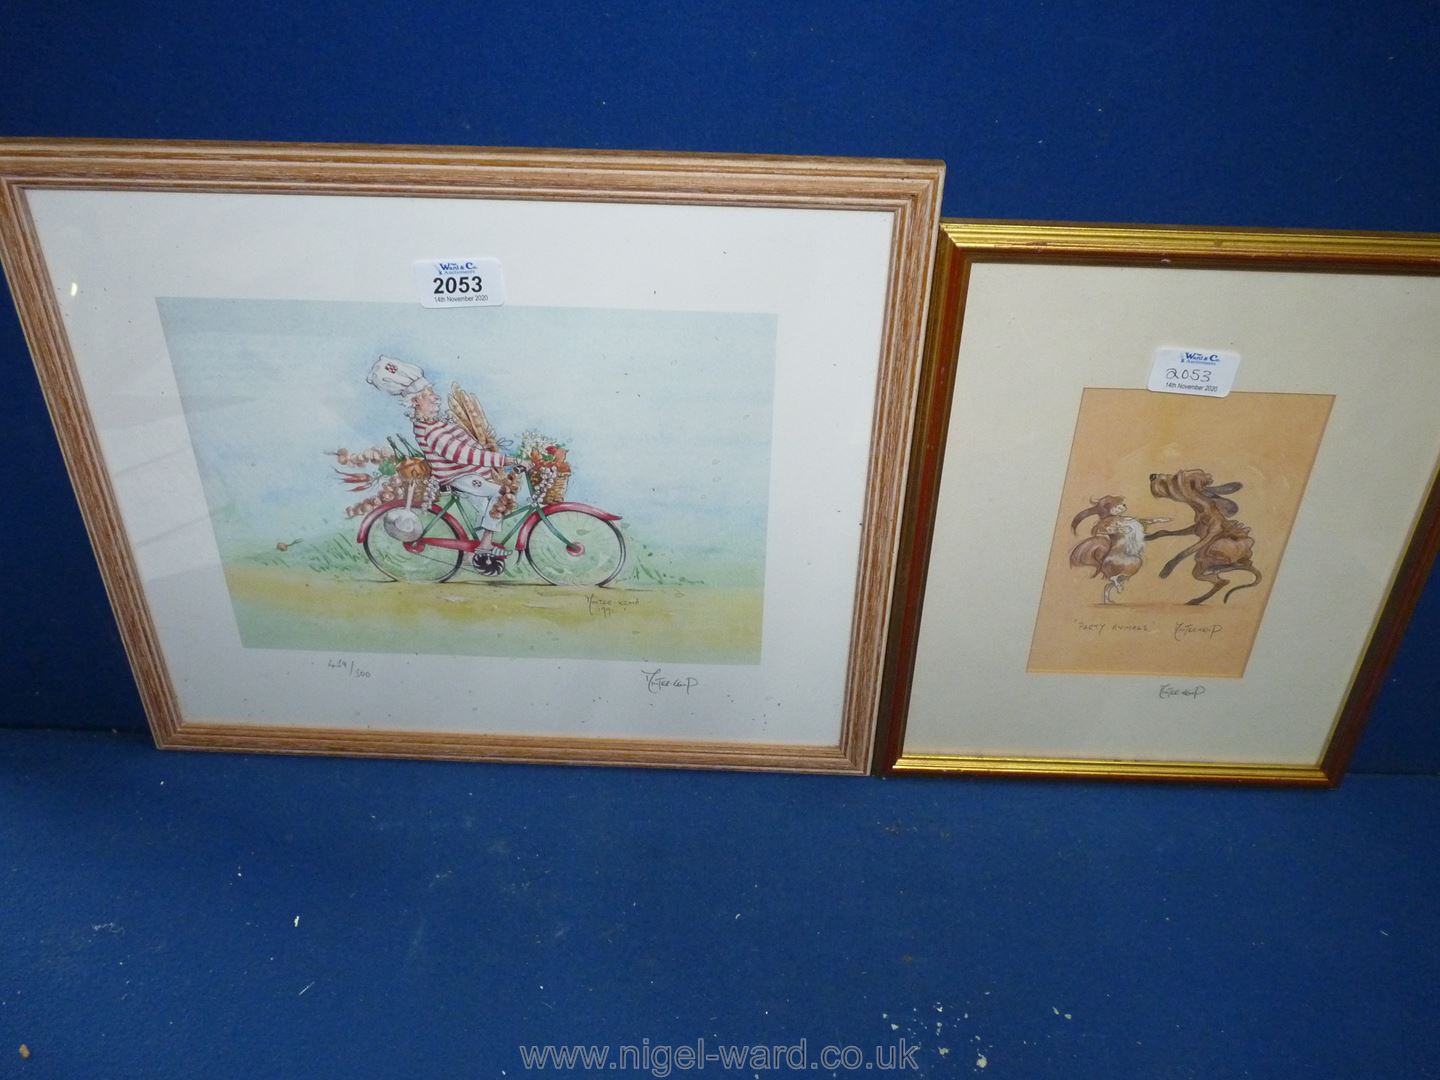 A framed print 'Party Animals' by Minter Kemp,